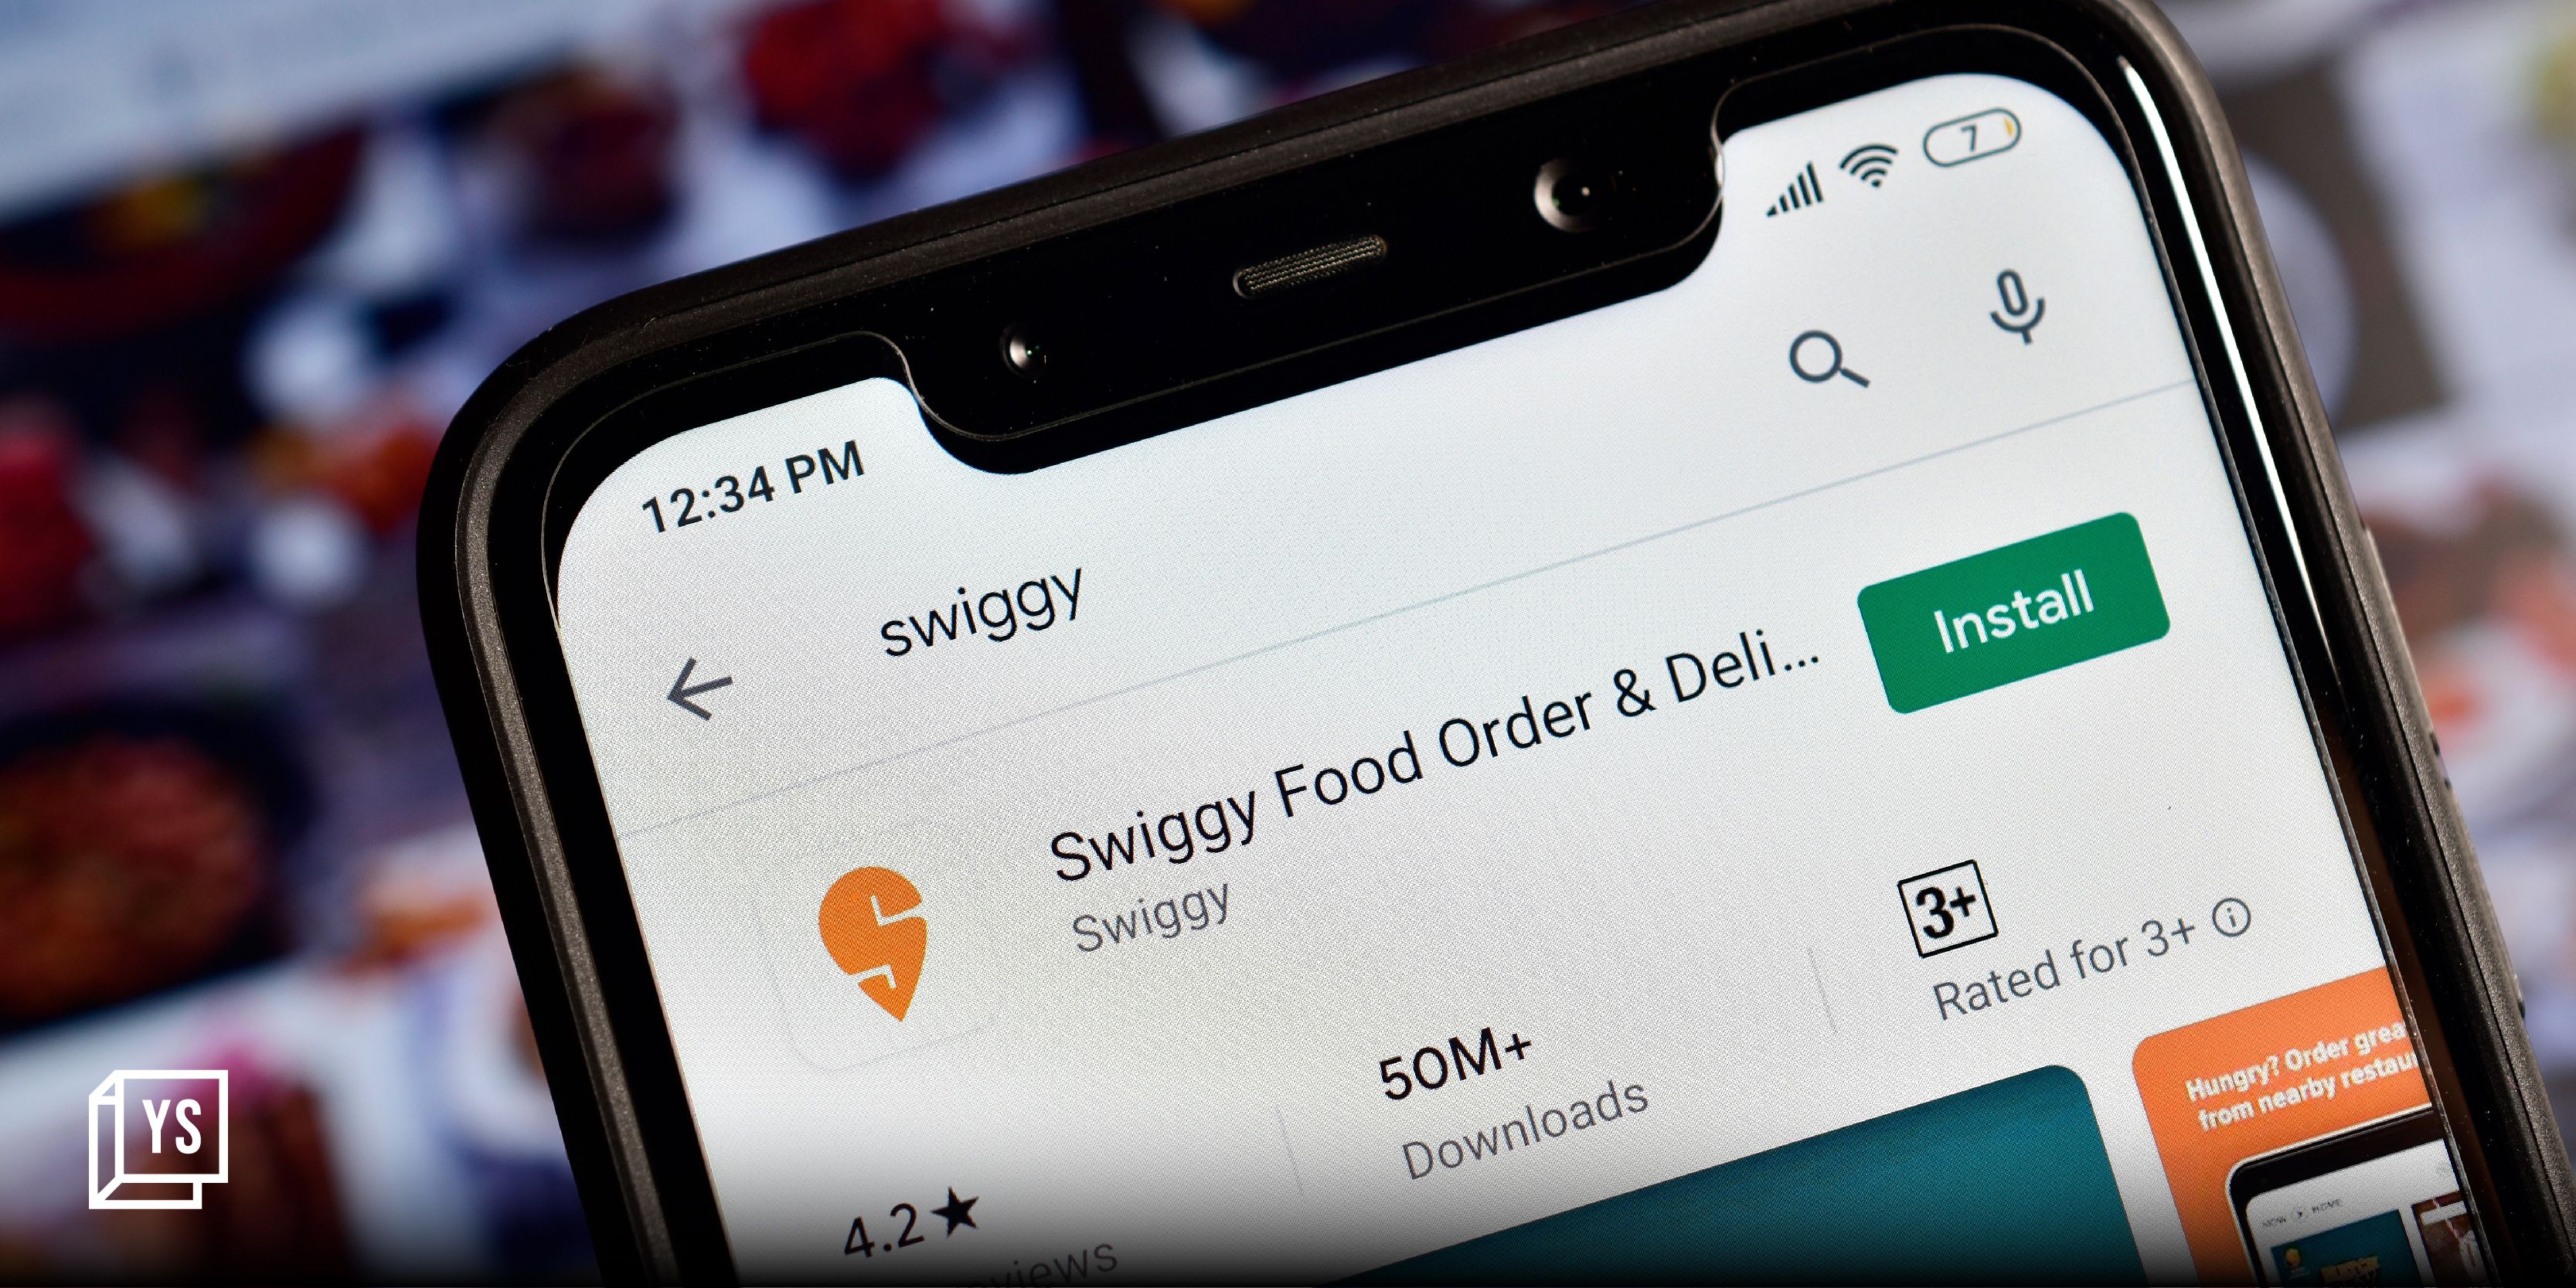 Swiggy's new AI feature to enable voice search, tailored recommendations